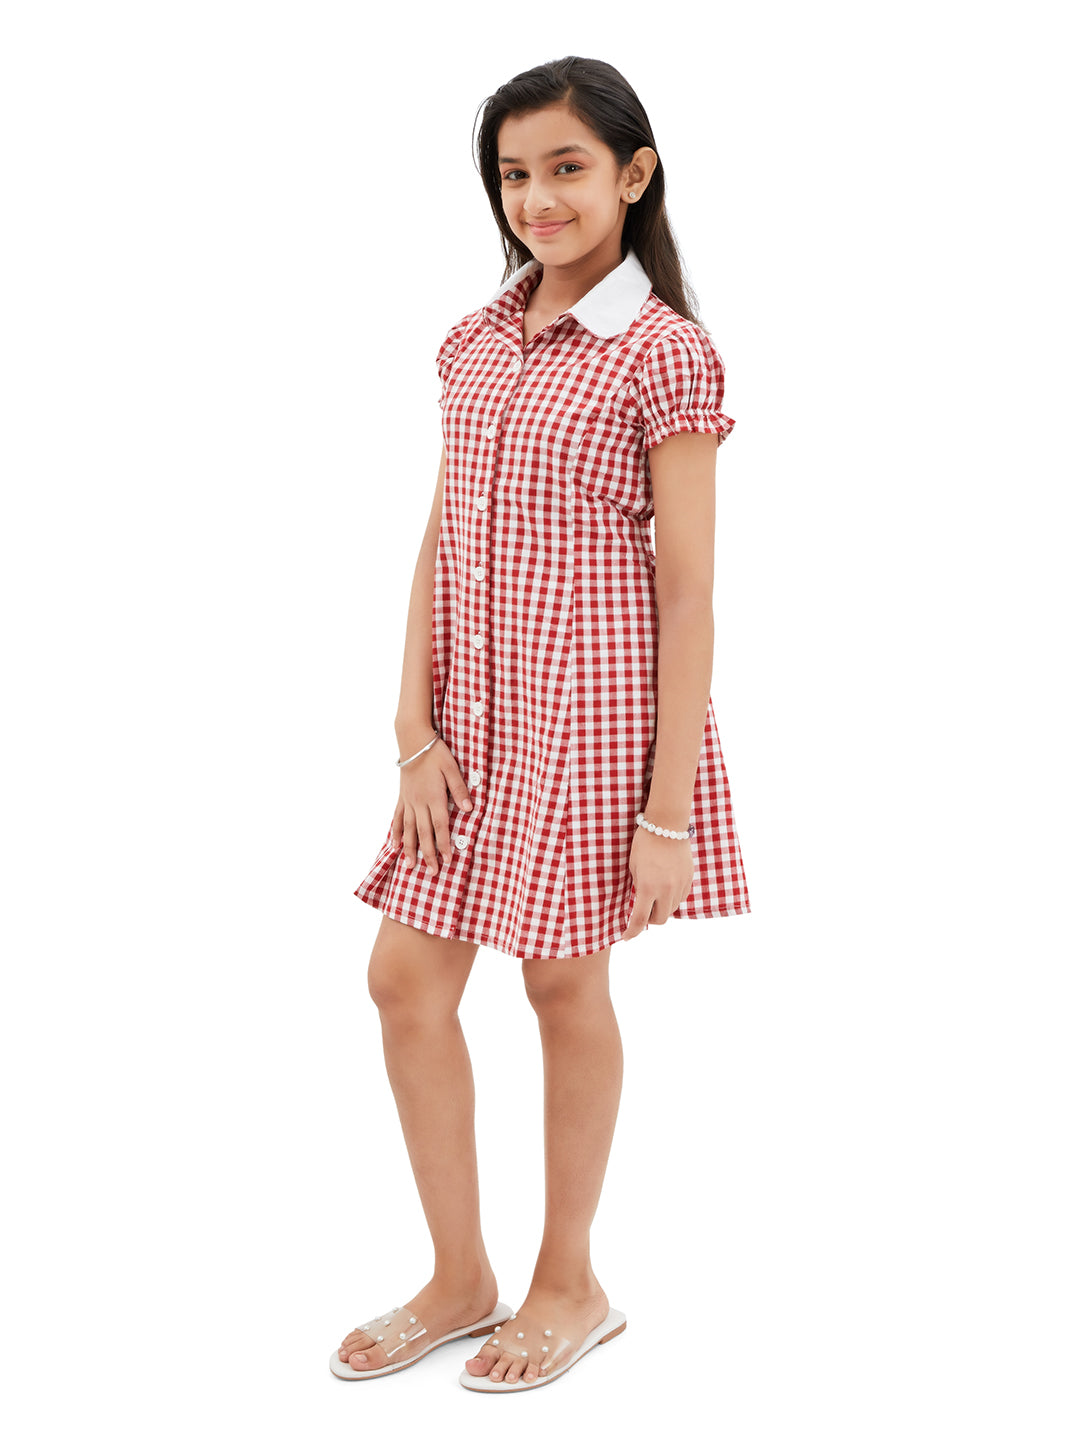 Olele® Bombay Dress with Peter Pan Collar - Red and White Gingham Check